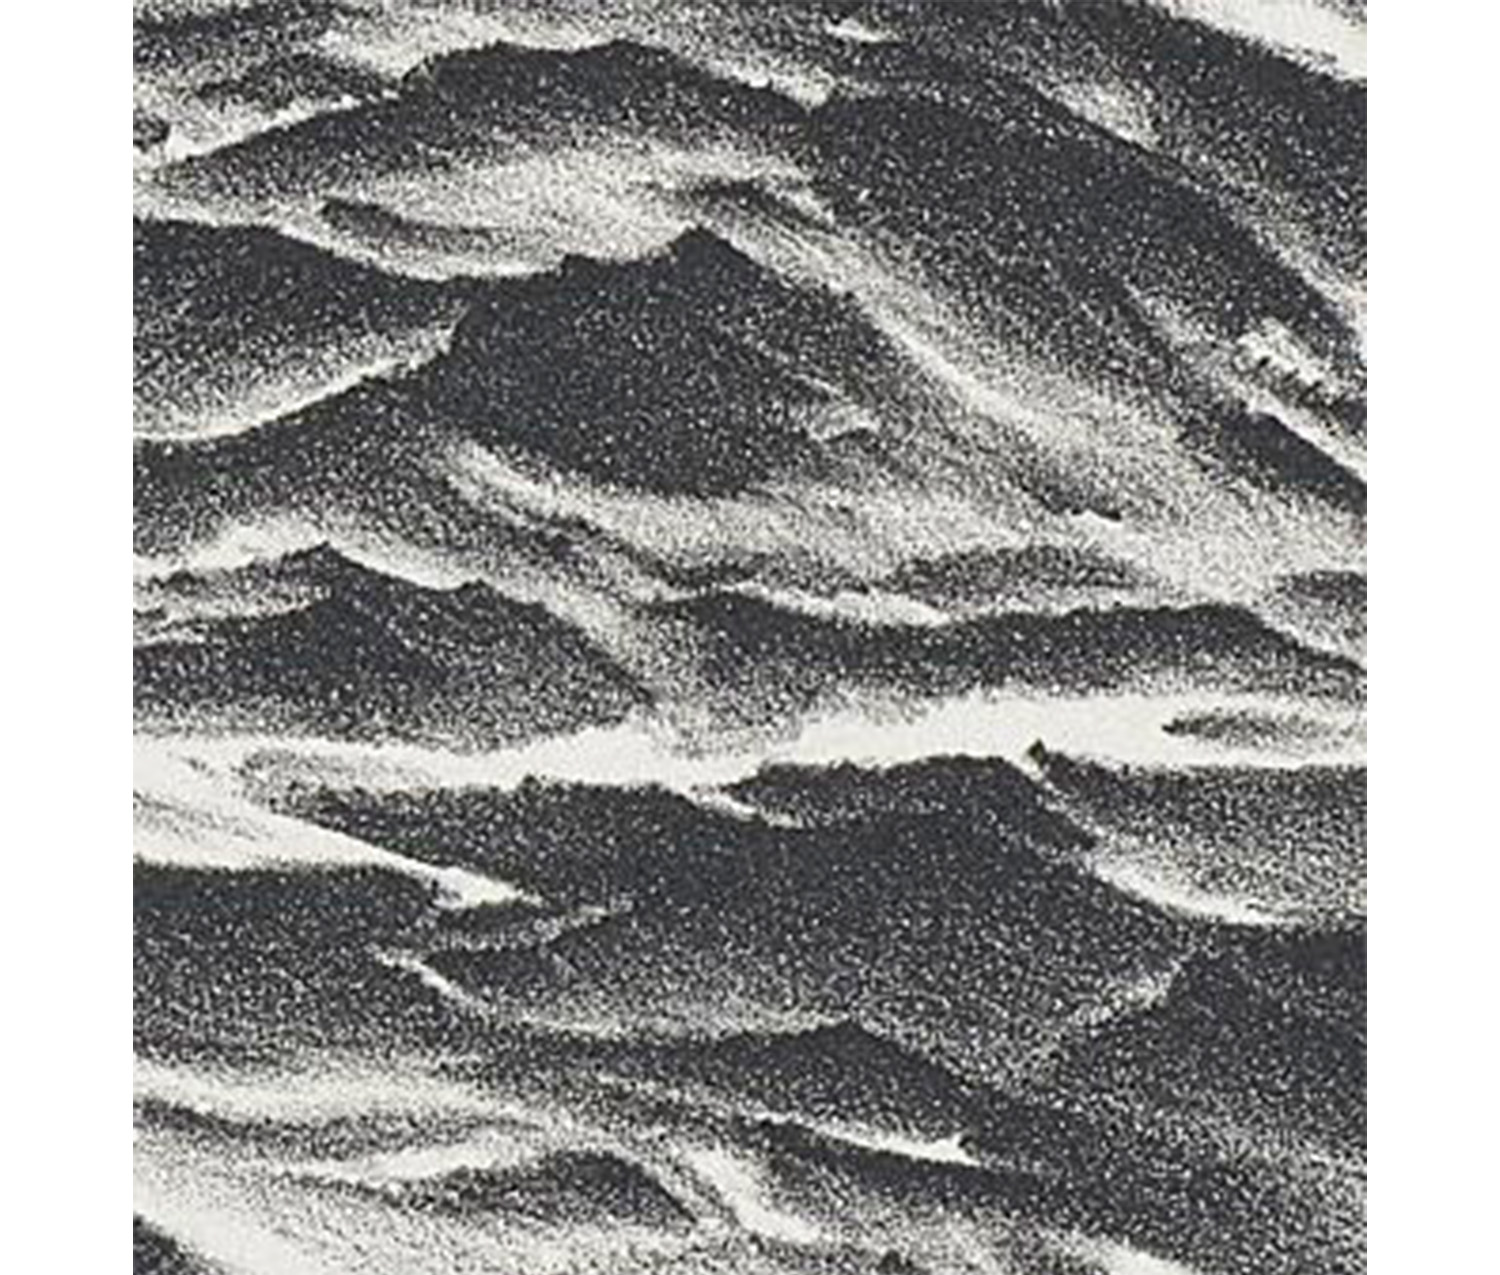 close up view of ocean waves in black and white